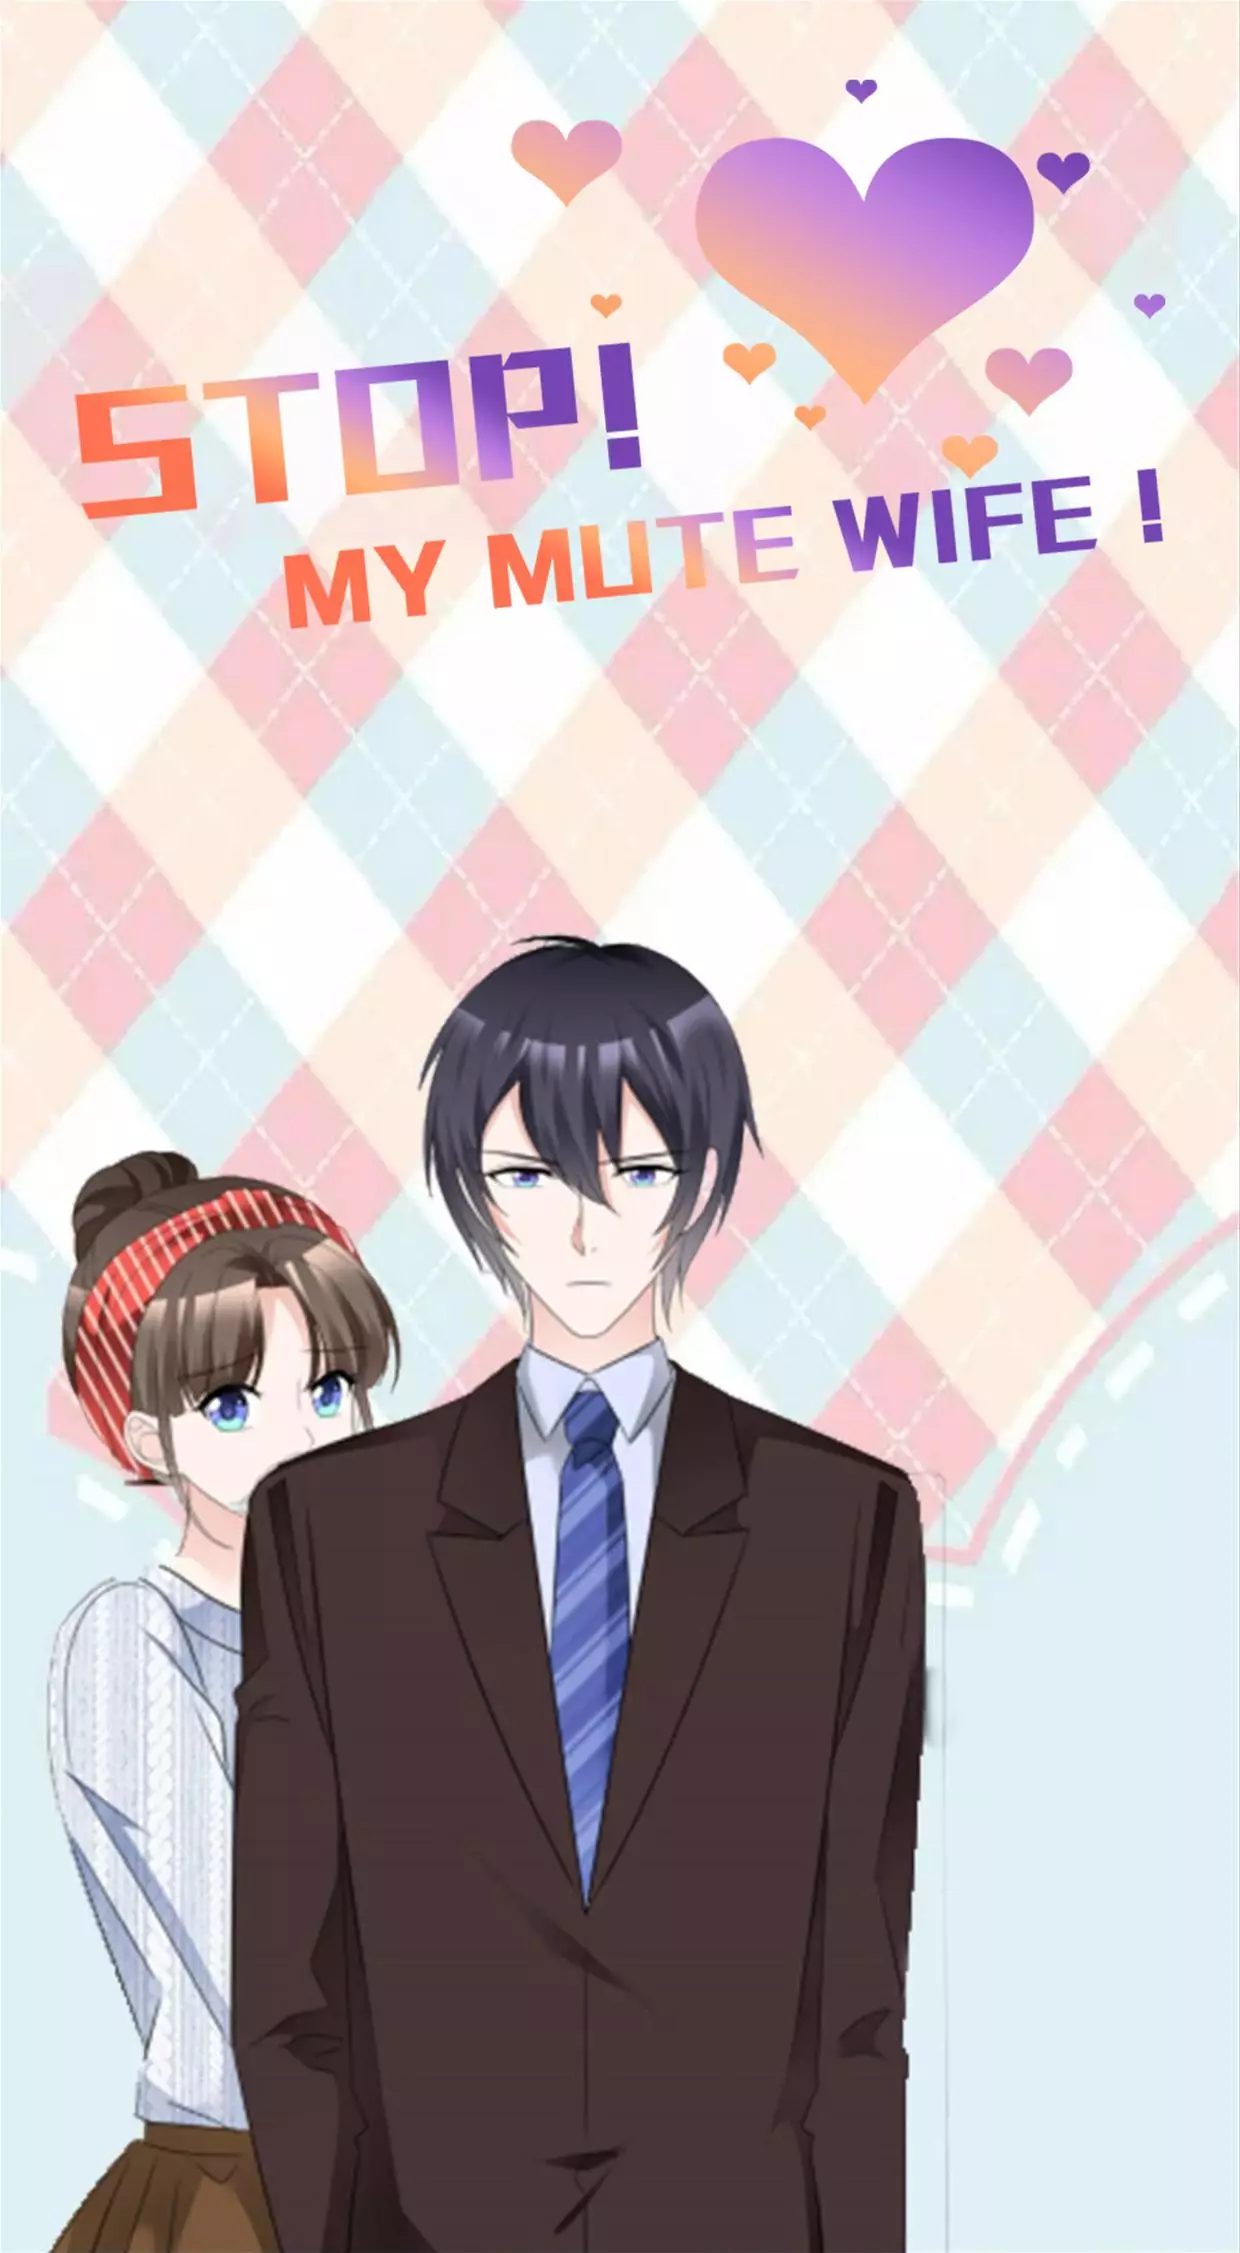 Stop, My Mute Wife! - 37 page 1-41c7d02a